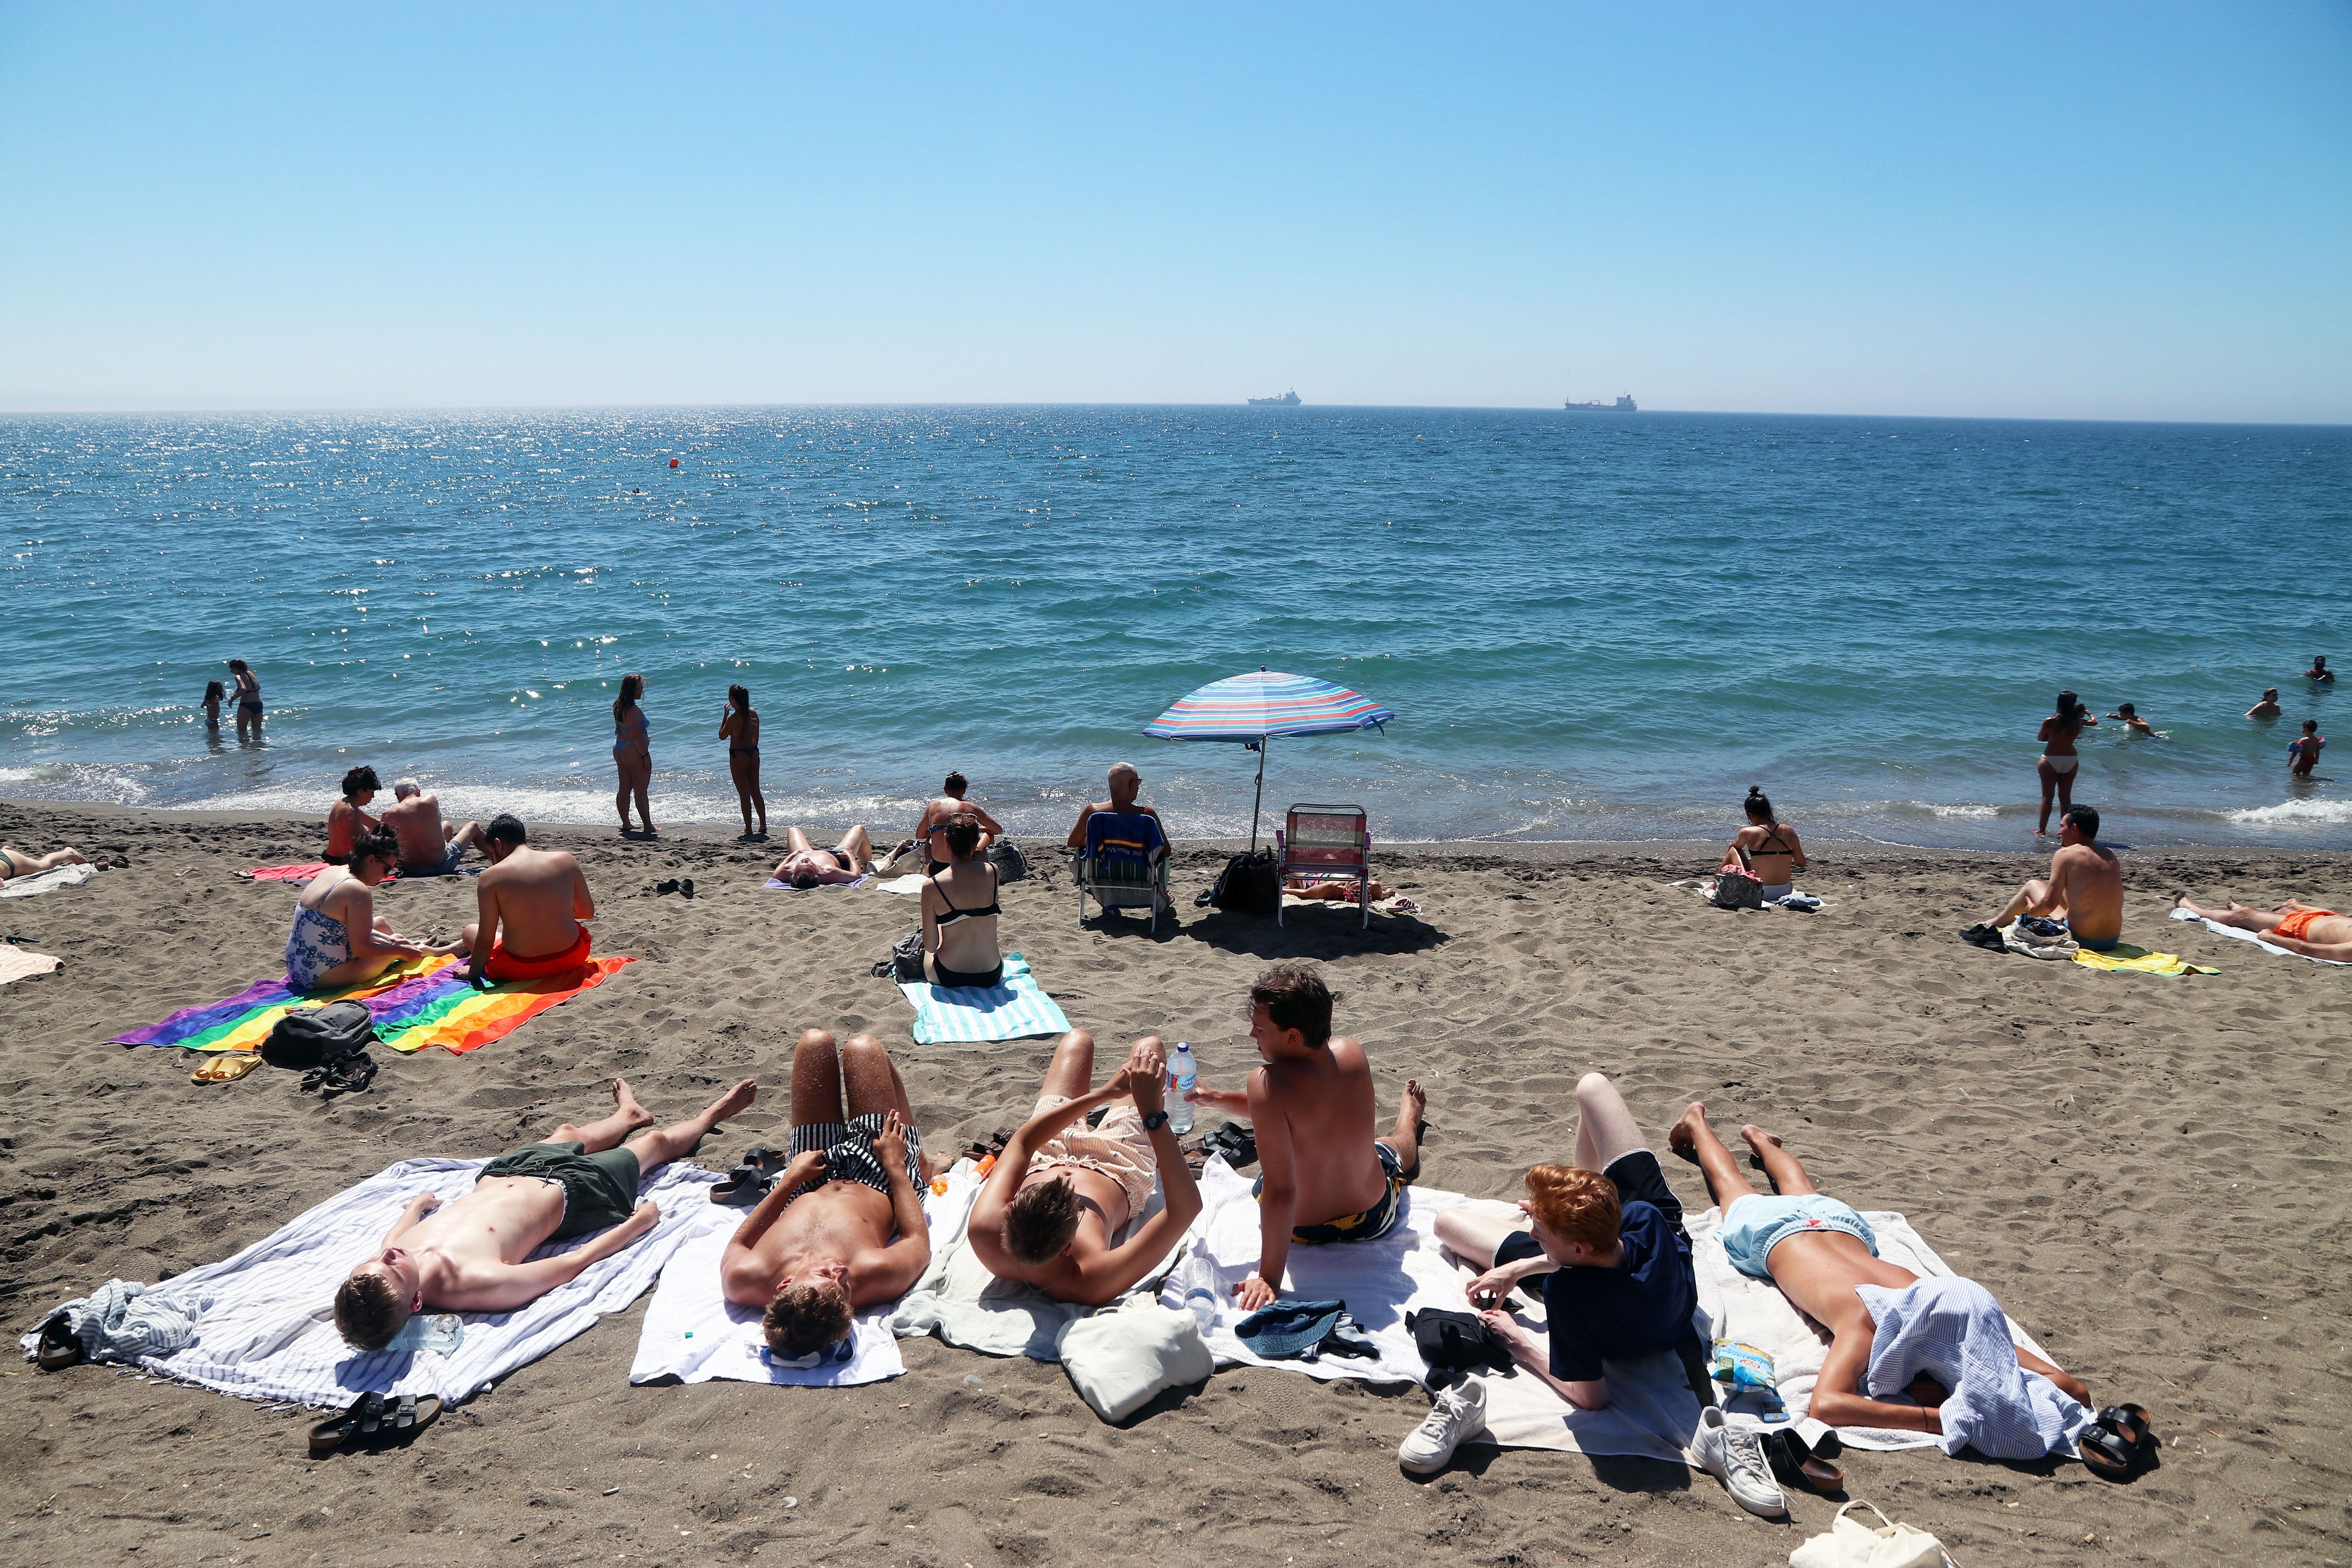 08/05/2021 Bathers and tourists enjoy a day at La Malagueta beach, where today the news was announced that the United Kingdom keeps Spain in amber and does not place it in the red zone due to Covid on August 5, 2021 in Malaga (Andalusia) ECONOMY Álex Zea - Europa Press